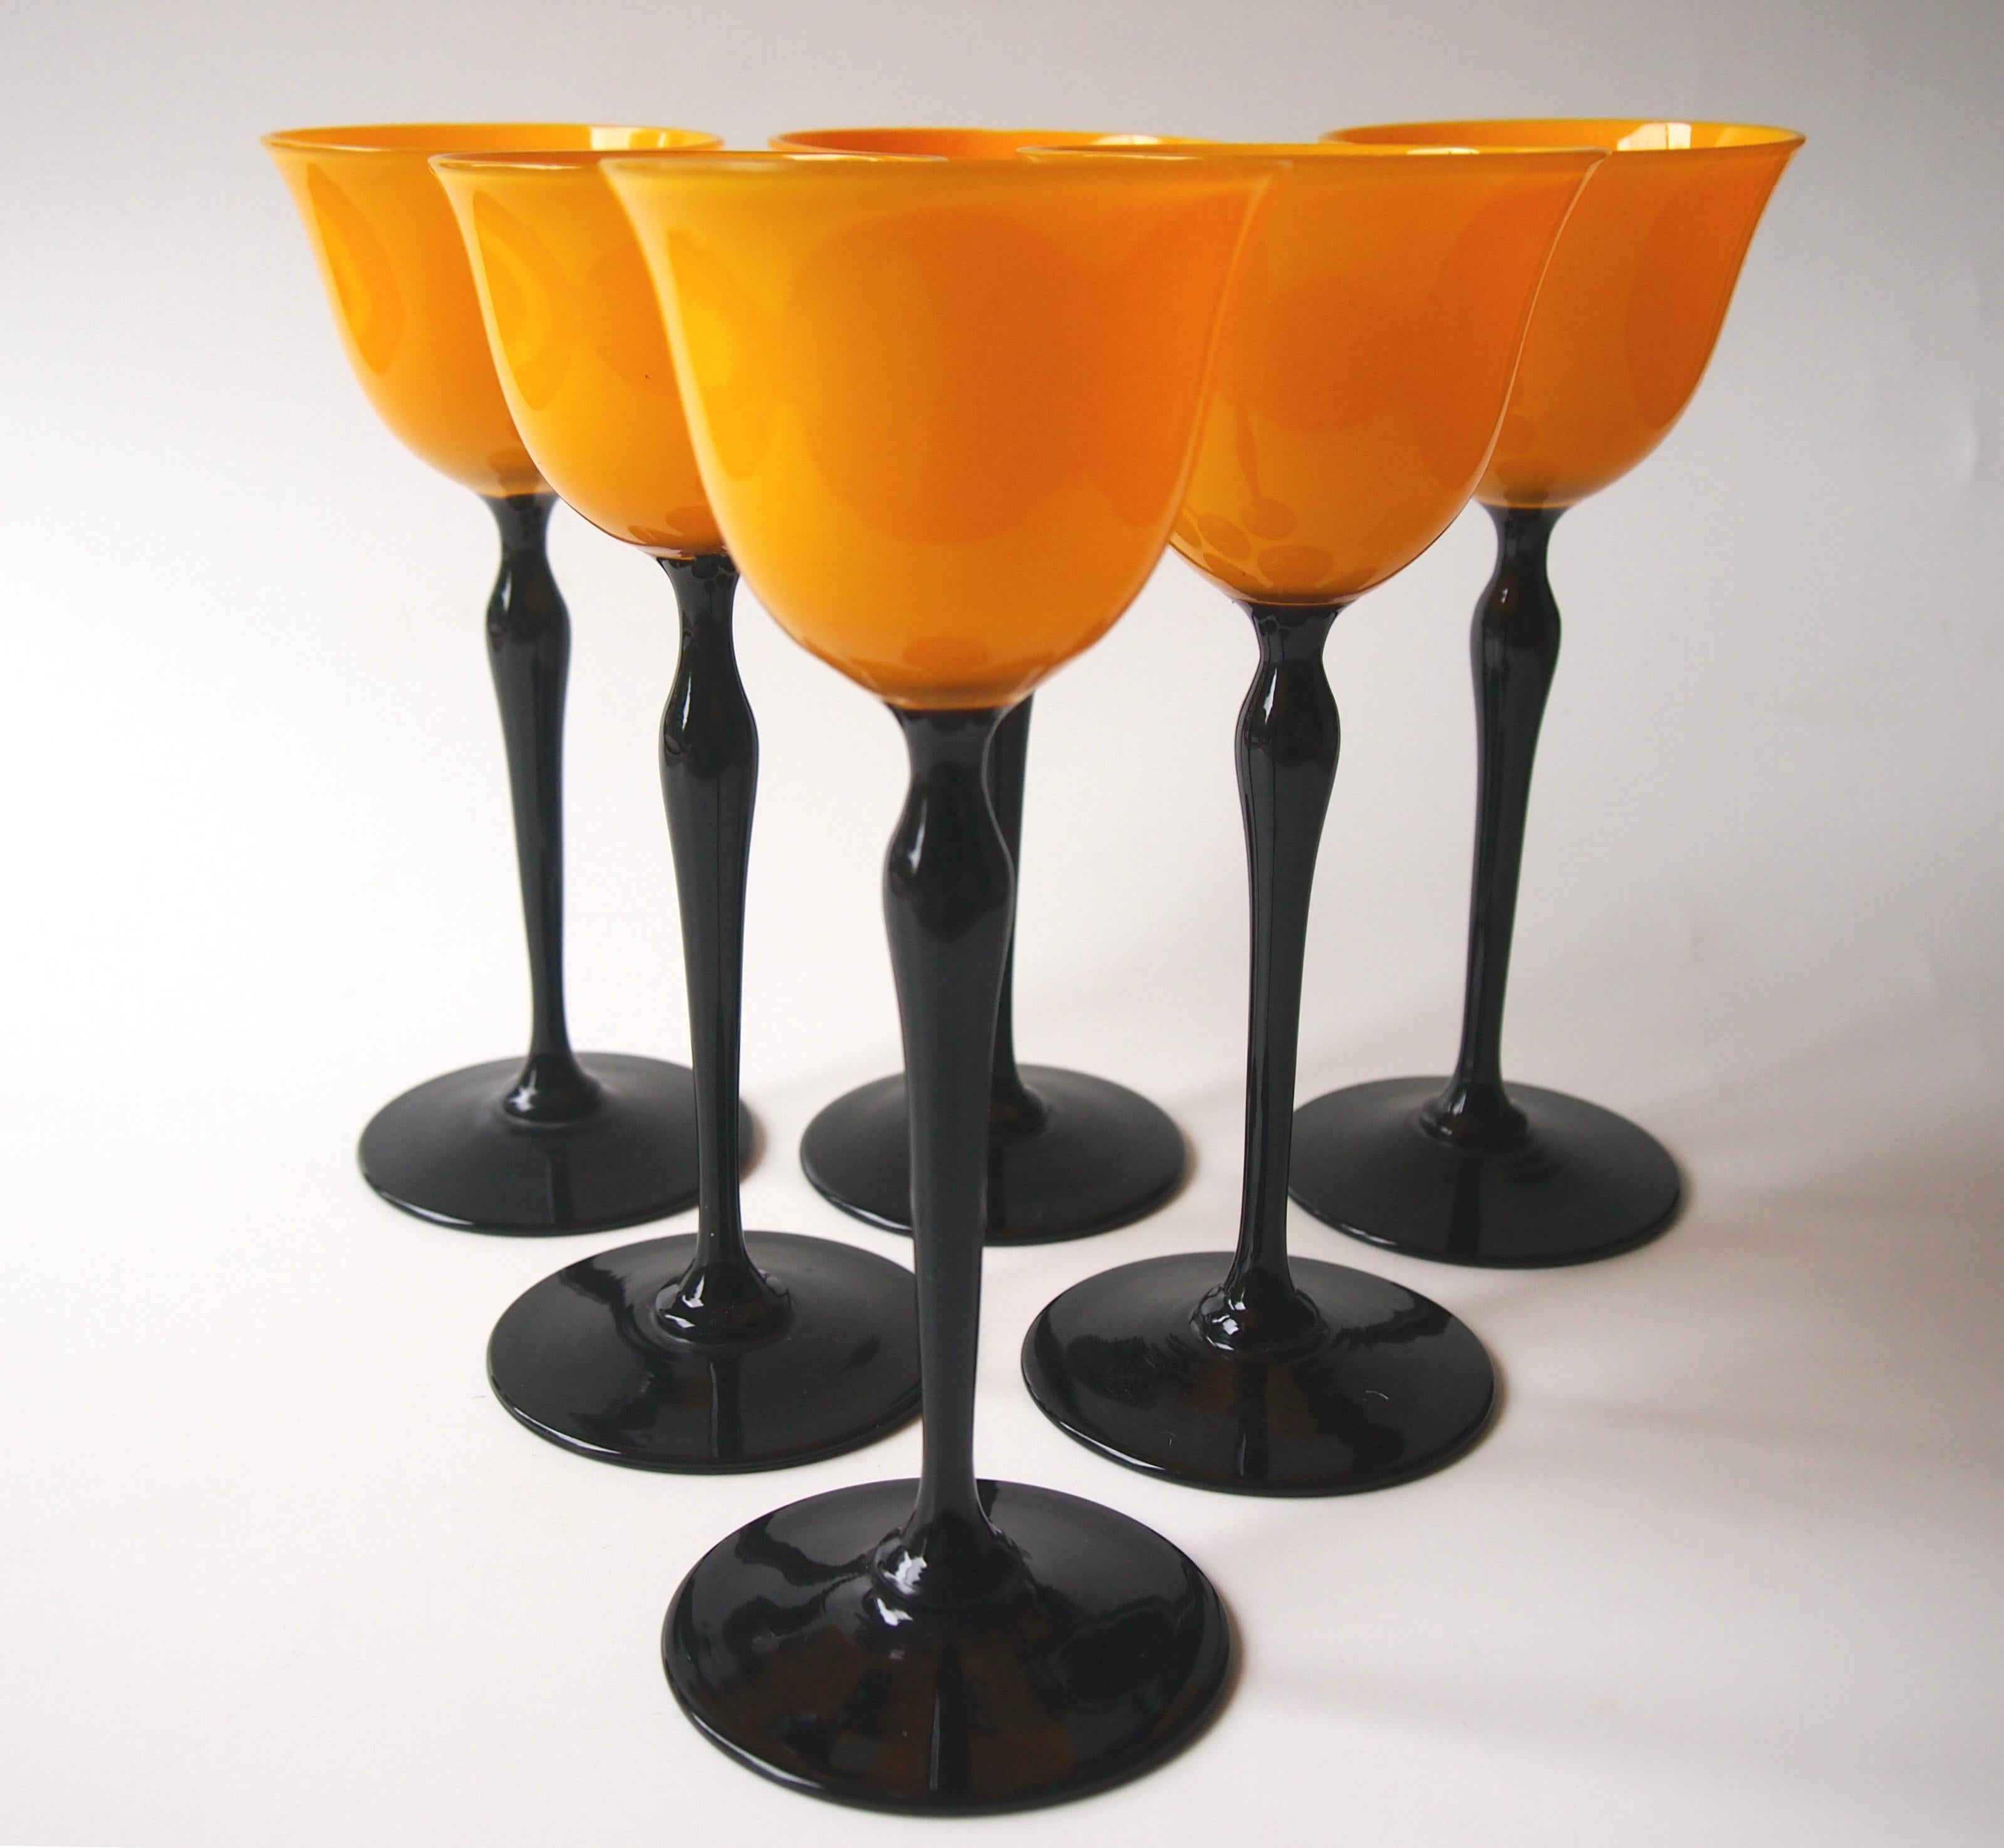 Dramatic set of six 'Tango' Art Deco Harrach wine glasses in vibrant orange on black stems. Bohemian Tango ware was very popular in the USA in the 1920s and 30s and it was made by many companies. It's unusual to be able to identify such pieces to a